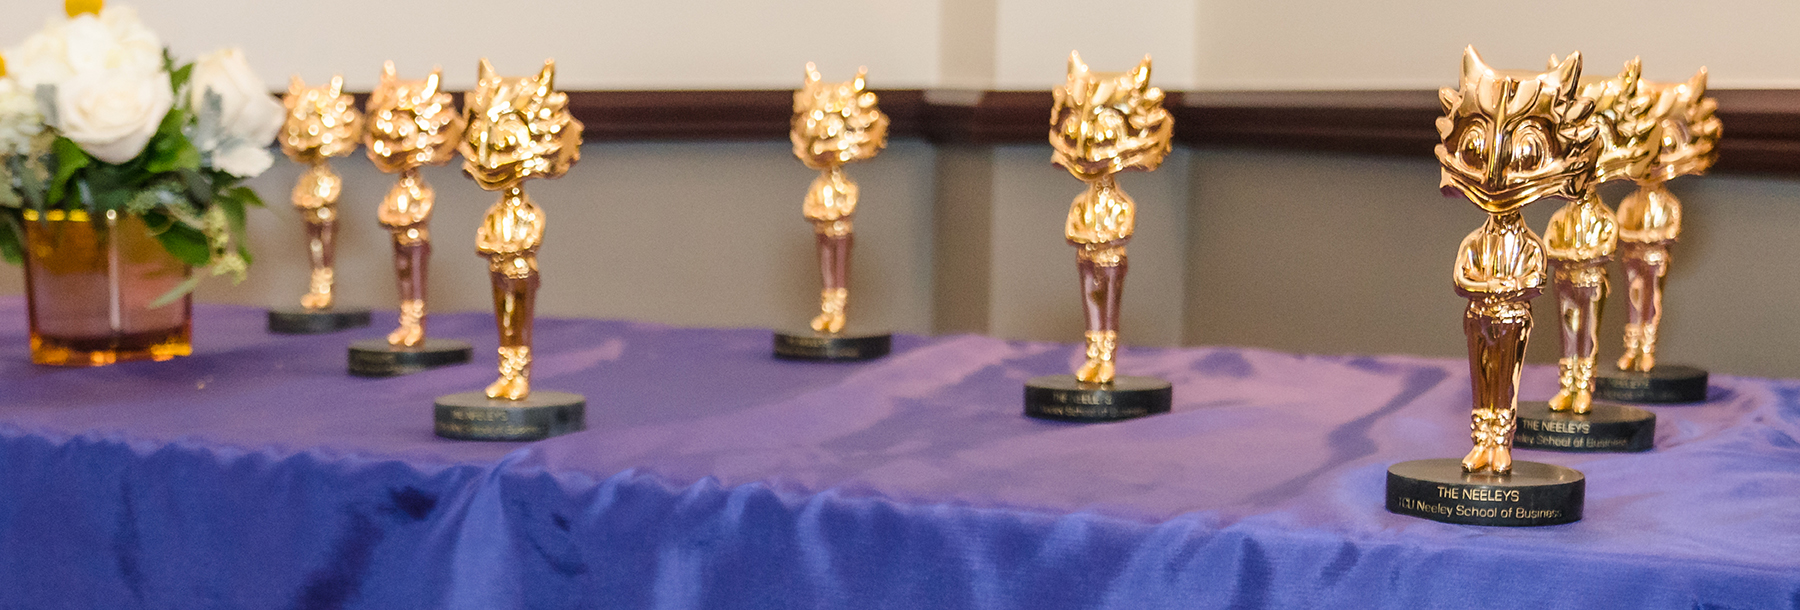 Section Image: Neeley Award trophies on a table 